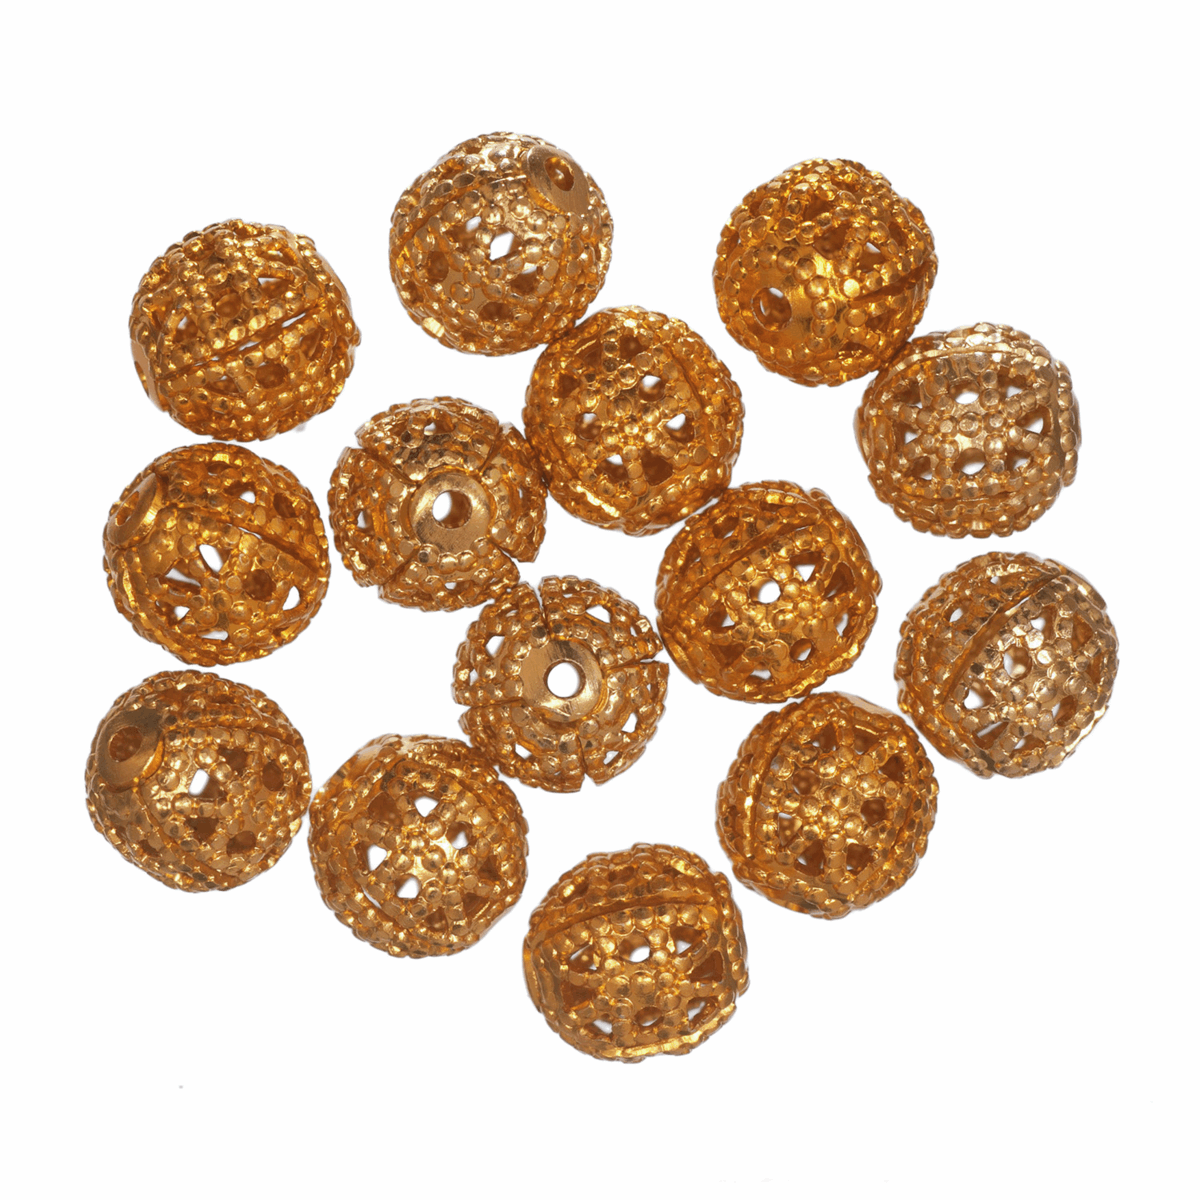 Trimits Deluxe Filigree Gold Plated Beads - 6mm (Pack of 14)